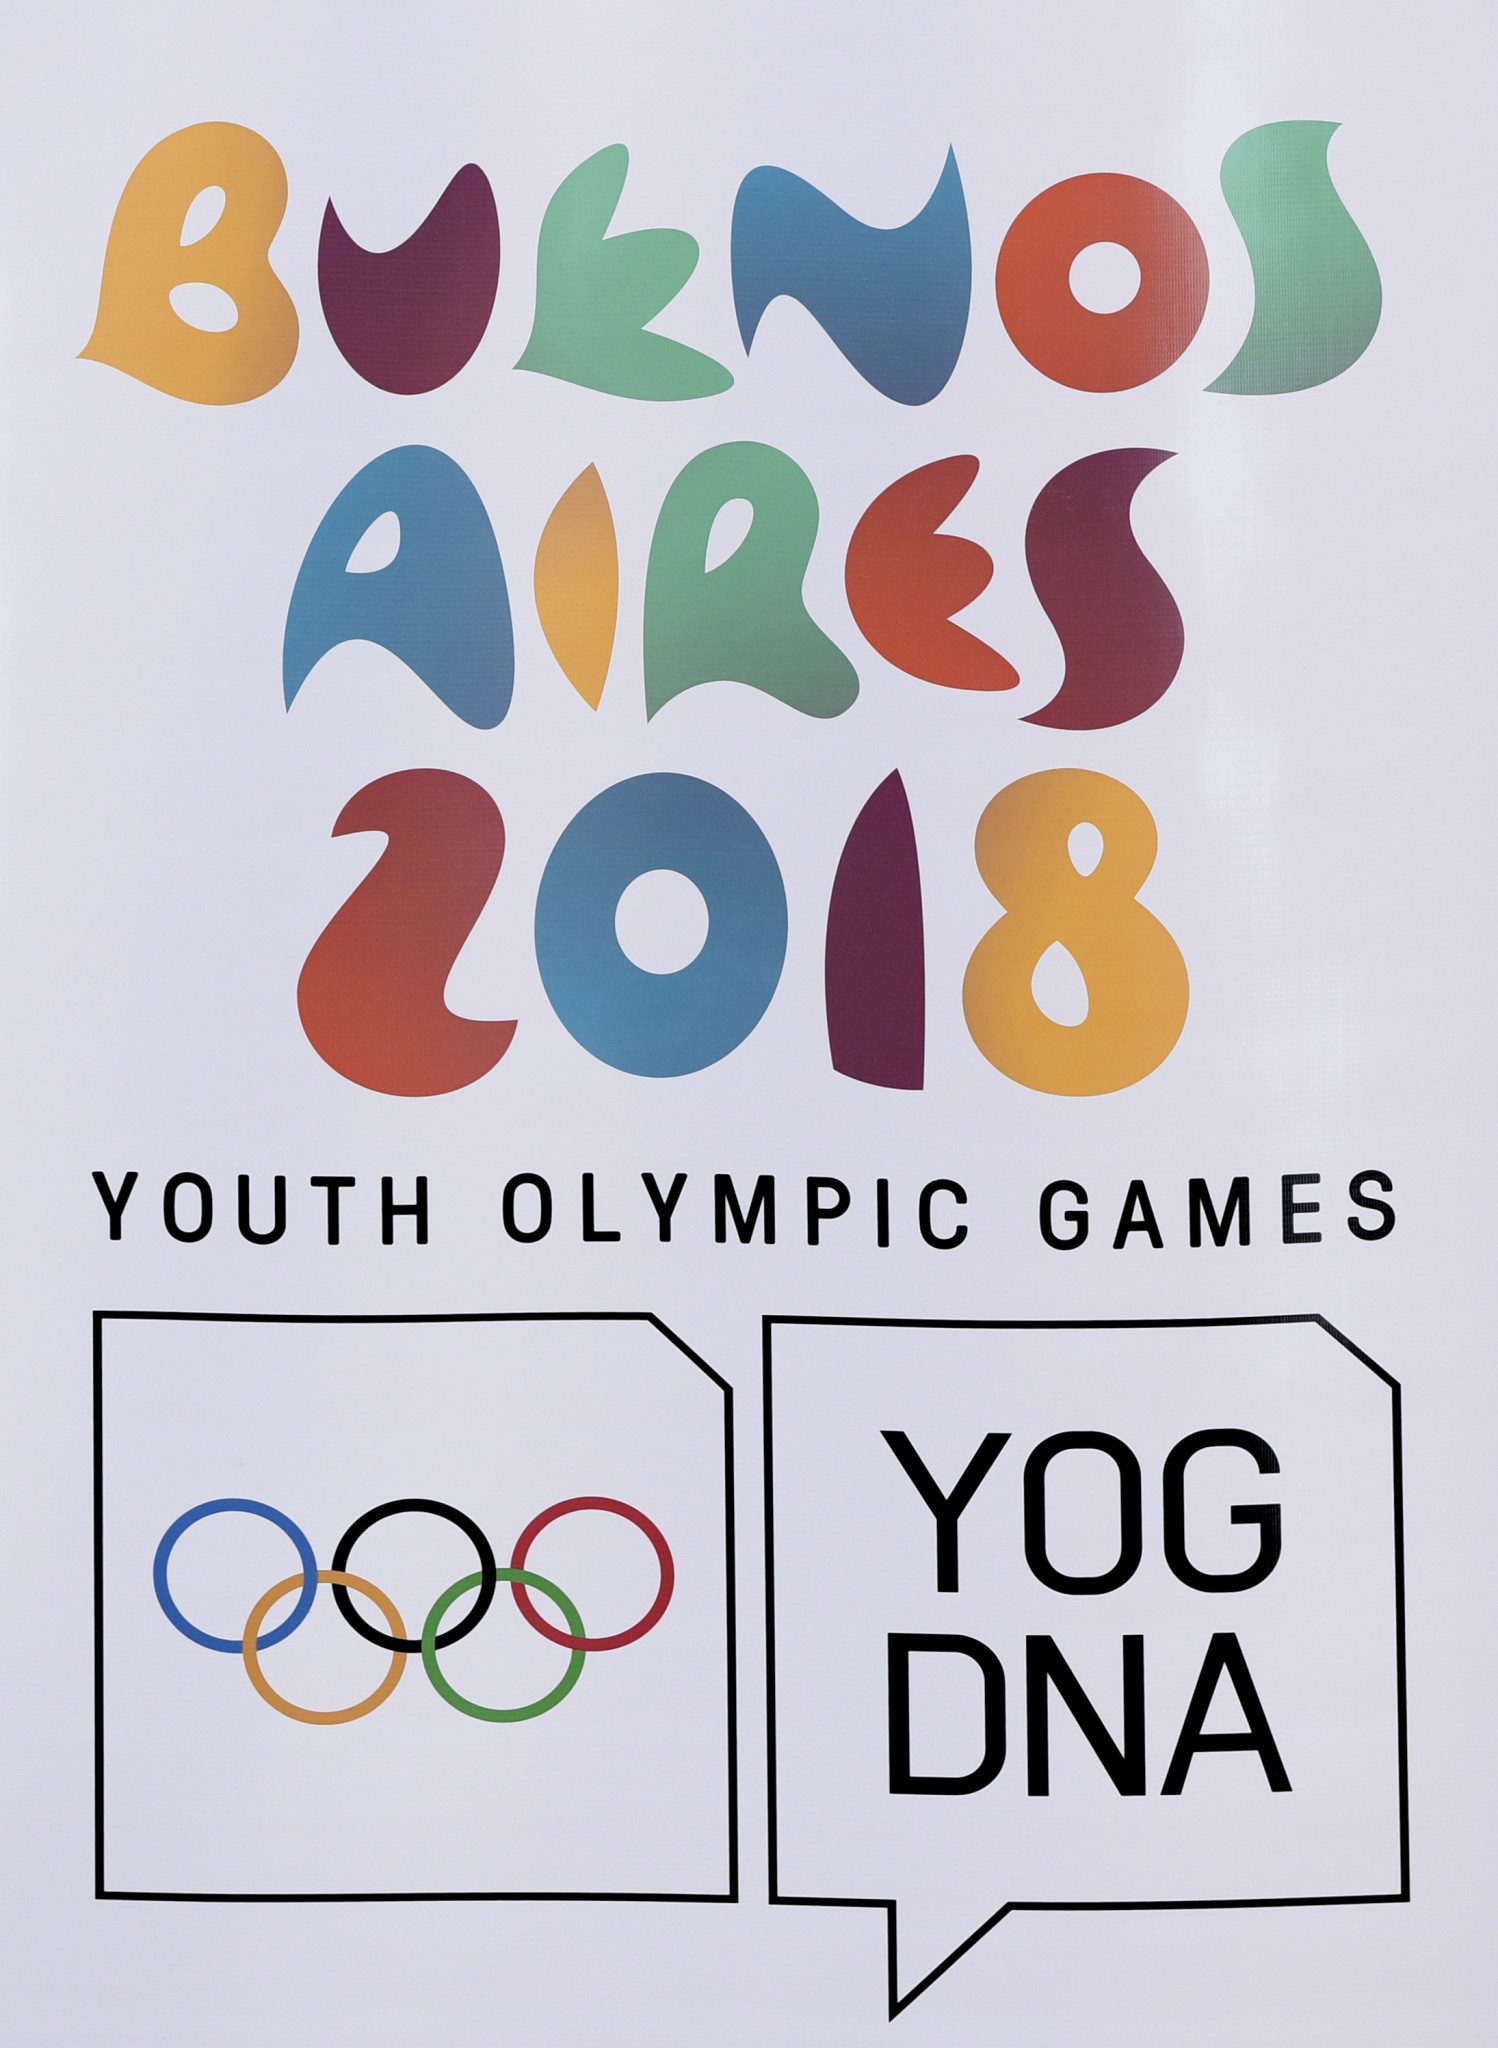 Buenos Aires 2018 has unveiled its slogan for this year's Summer Youth Olympic Games ©Buenos Aires 2018 